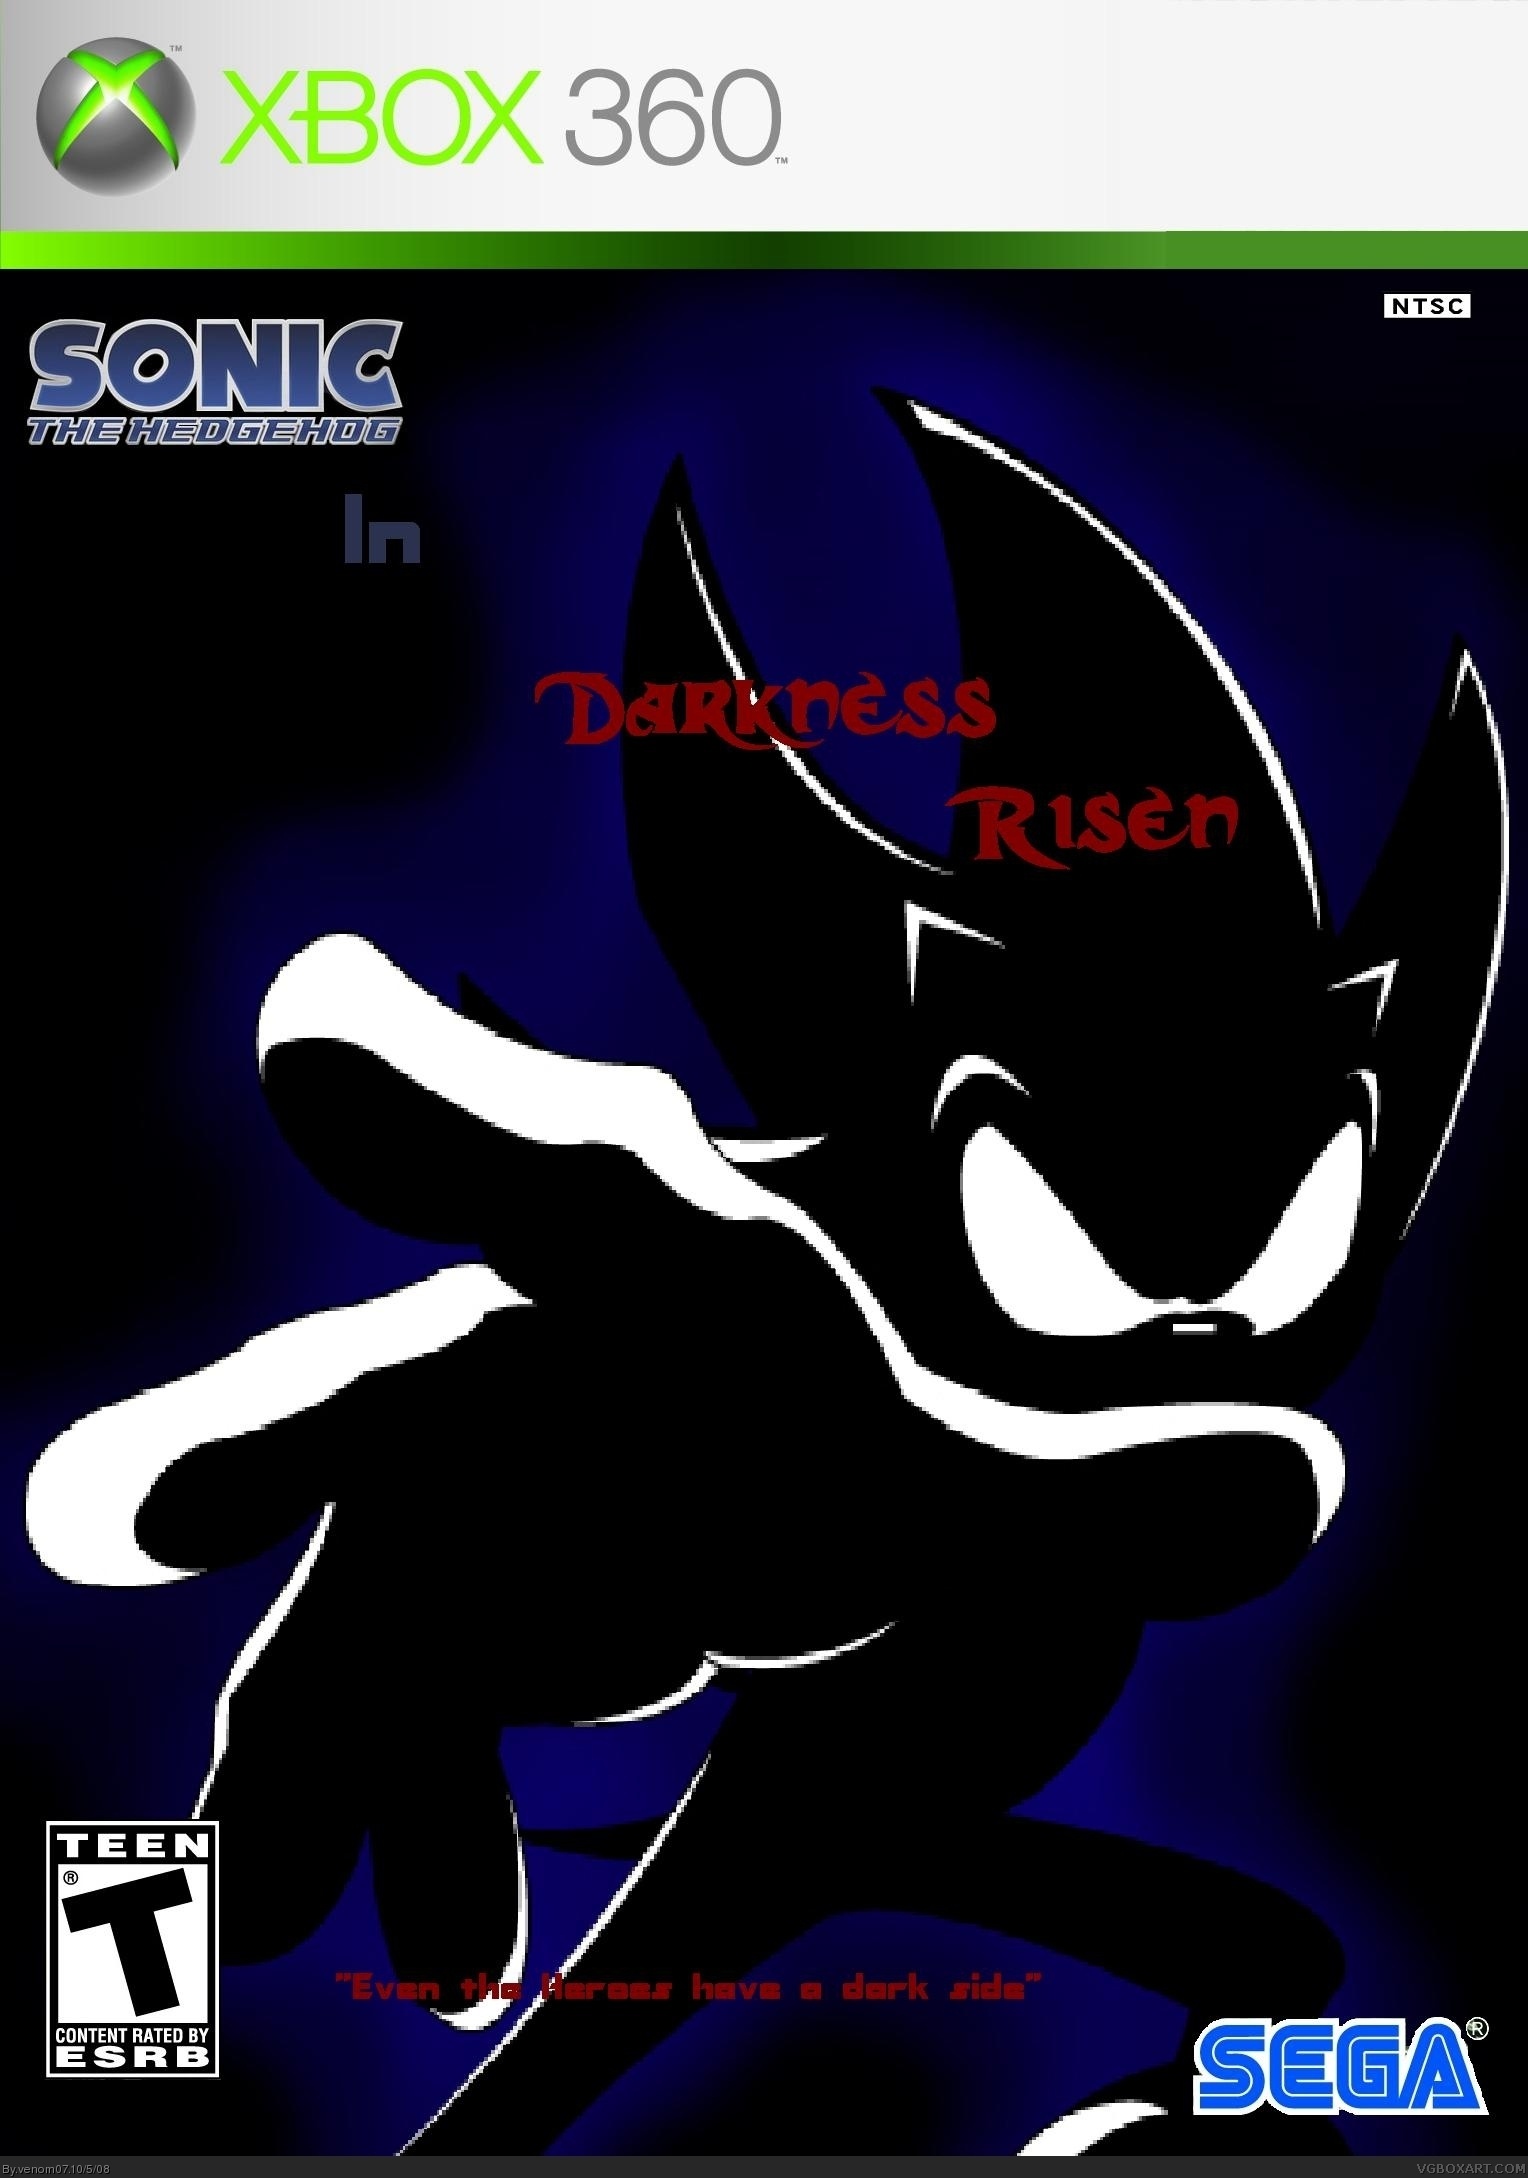 Sonic the hedgehog 2 :Darkness Risen box cover